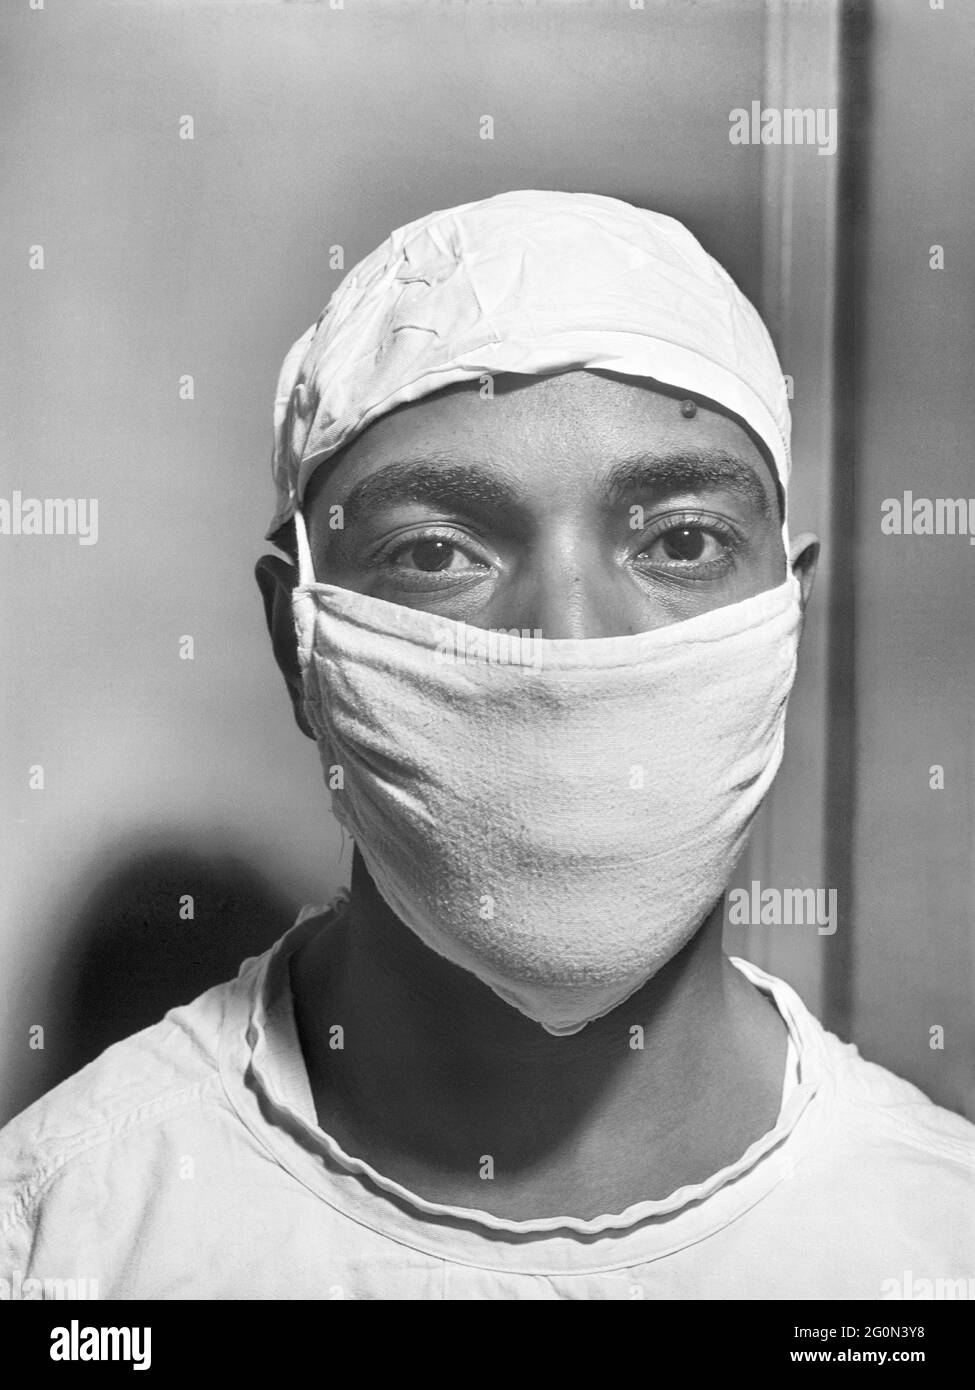 Dr. S.J. Jackson, Intern, preparing to assist in Operating Room, Provident Hospital, Chicago, Illinois,  USA, Jack Delano, U.S. Office of War Information, March 1942 Stock Photo